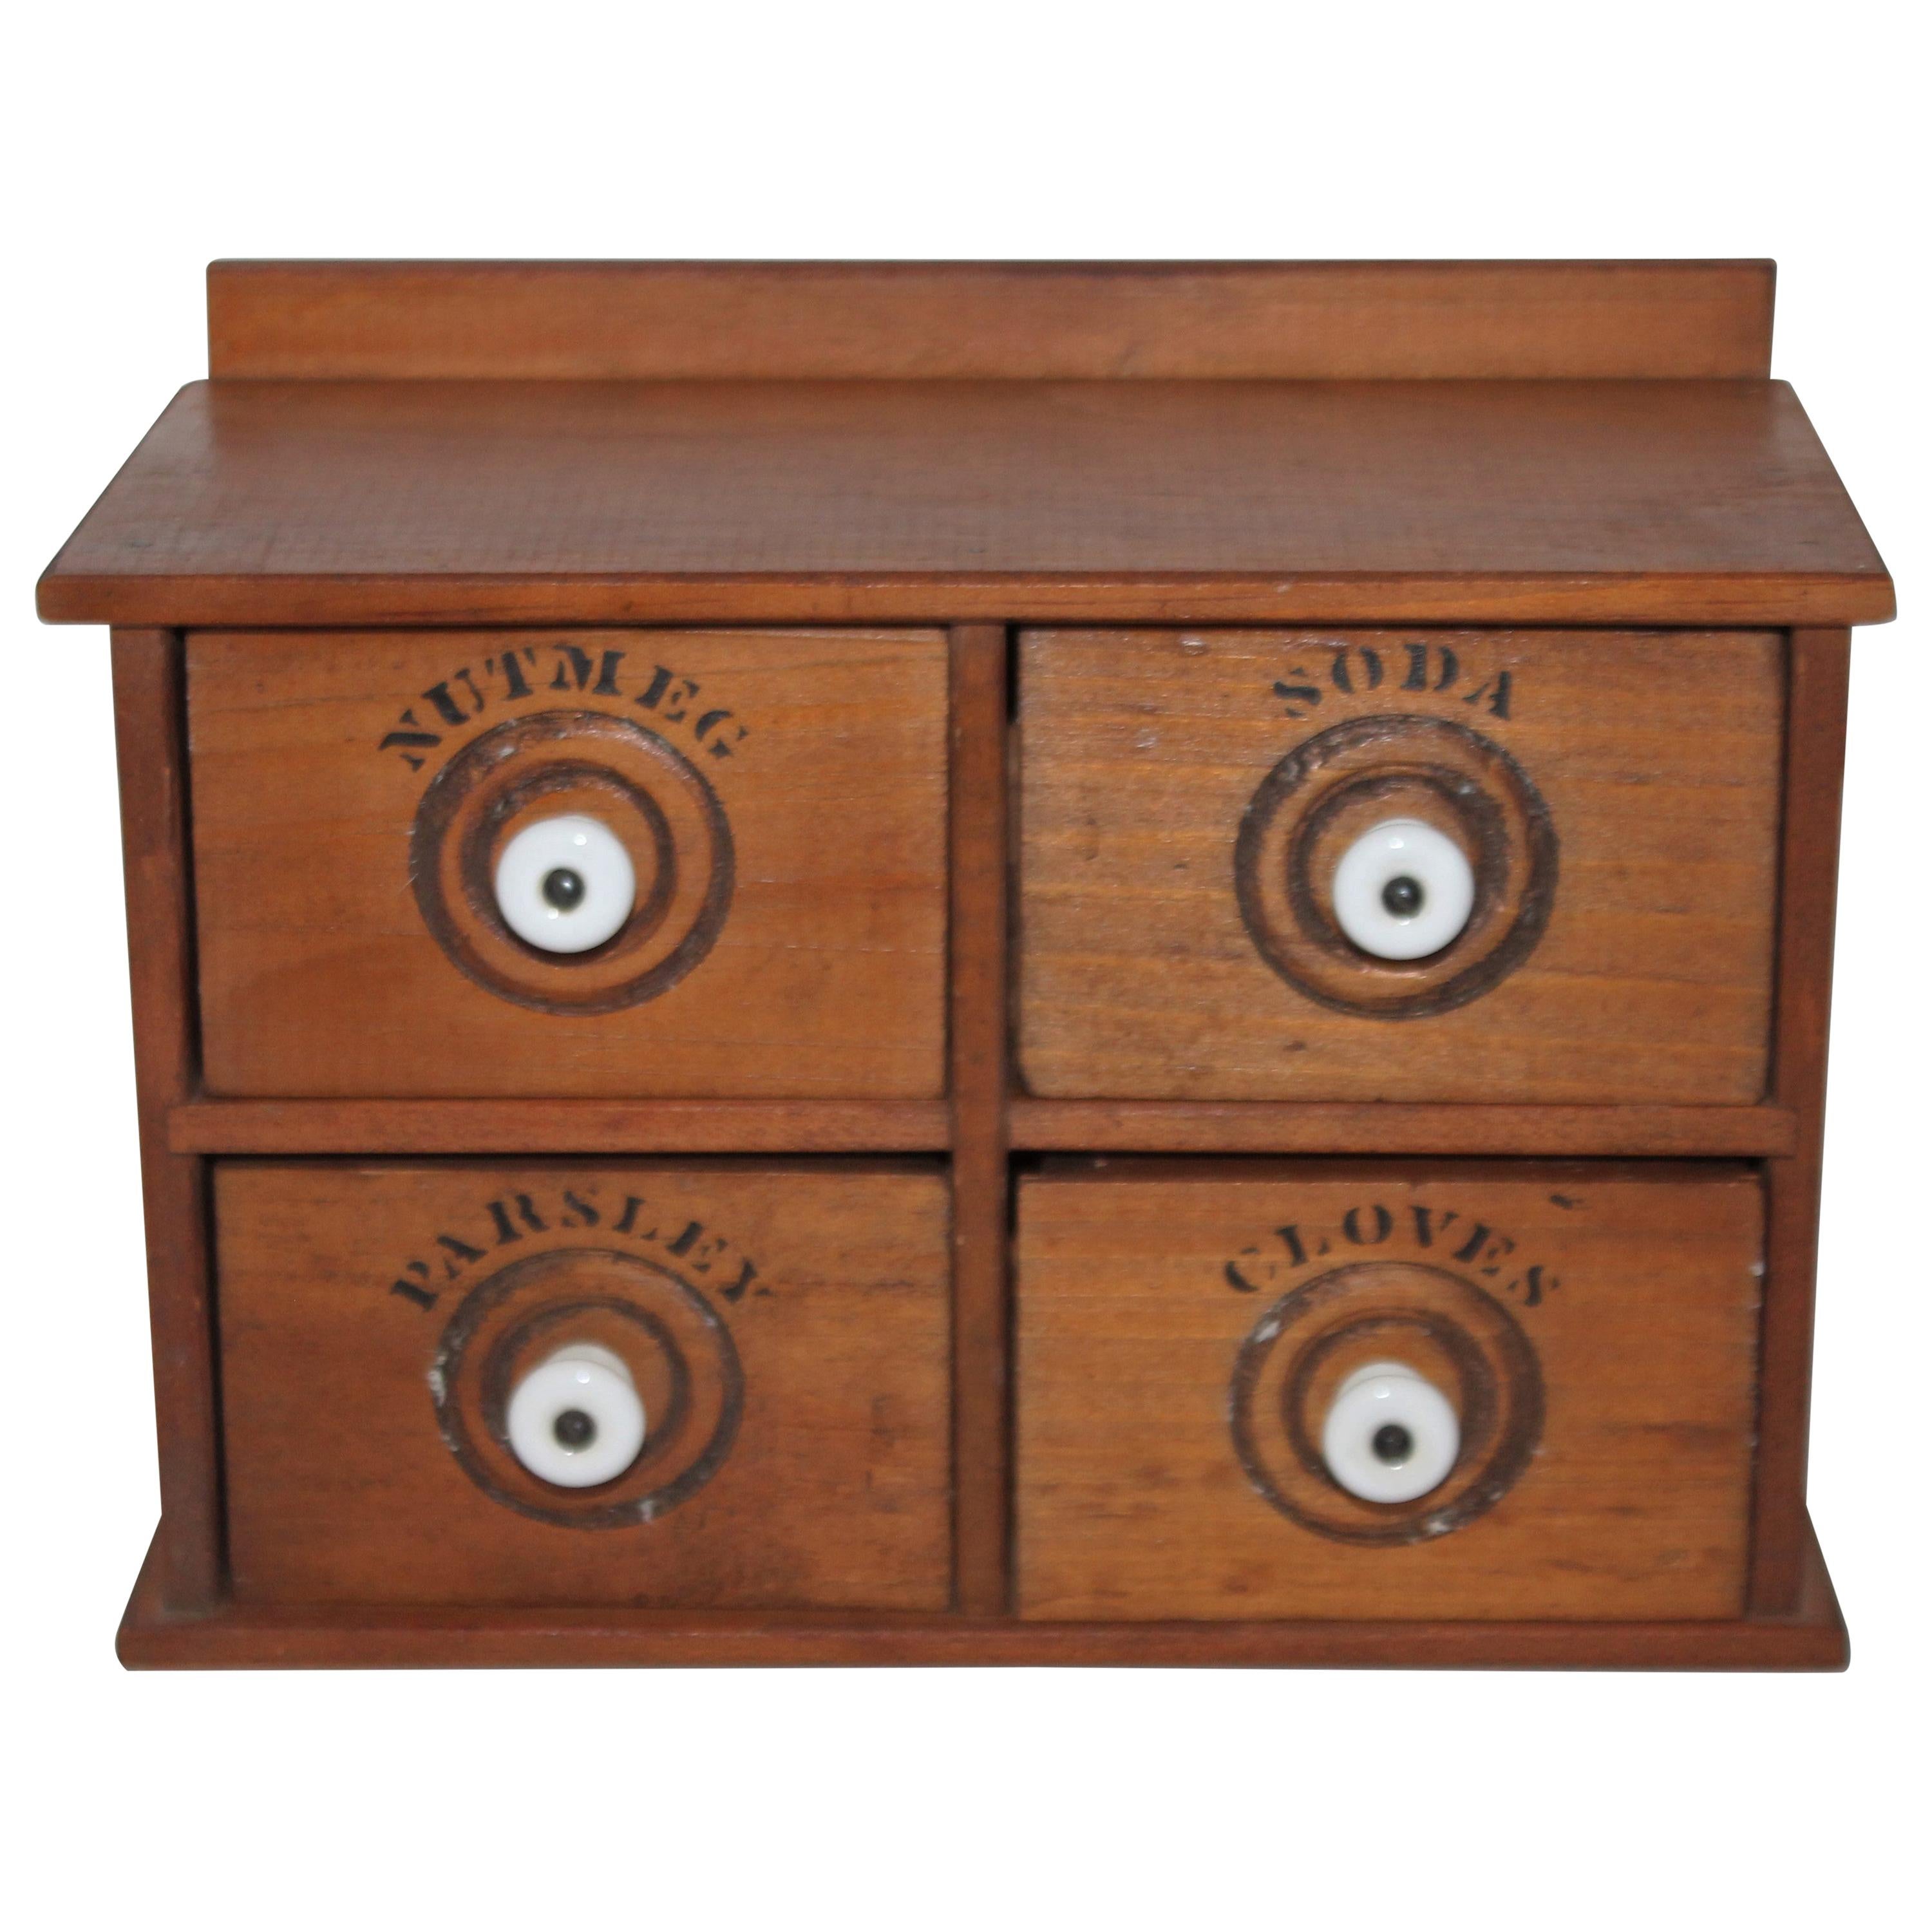 Miniature Early Spice Box with Original Stencil Drawers For Sale